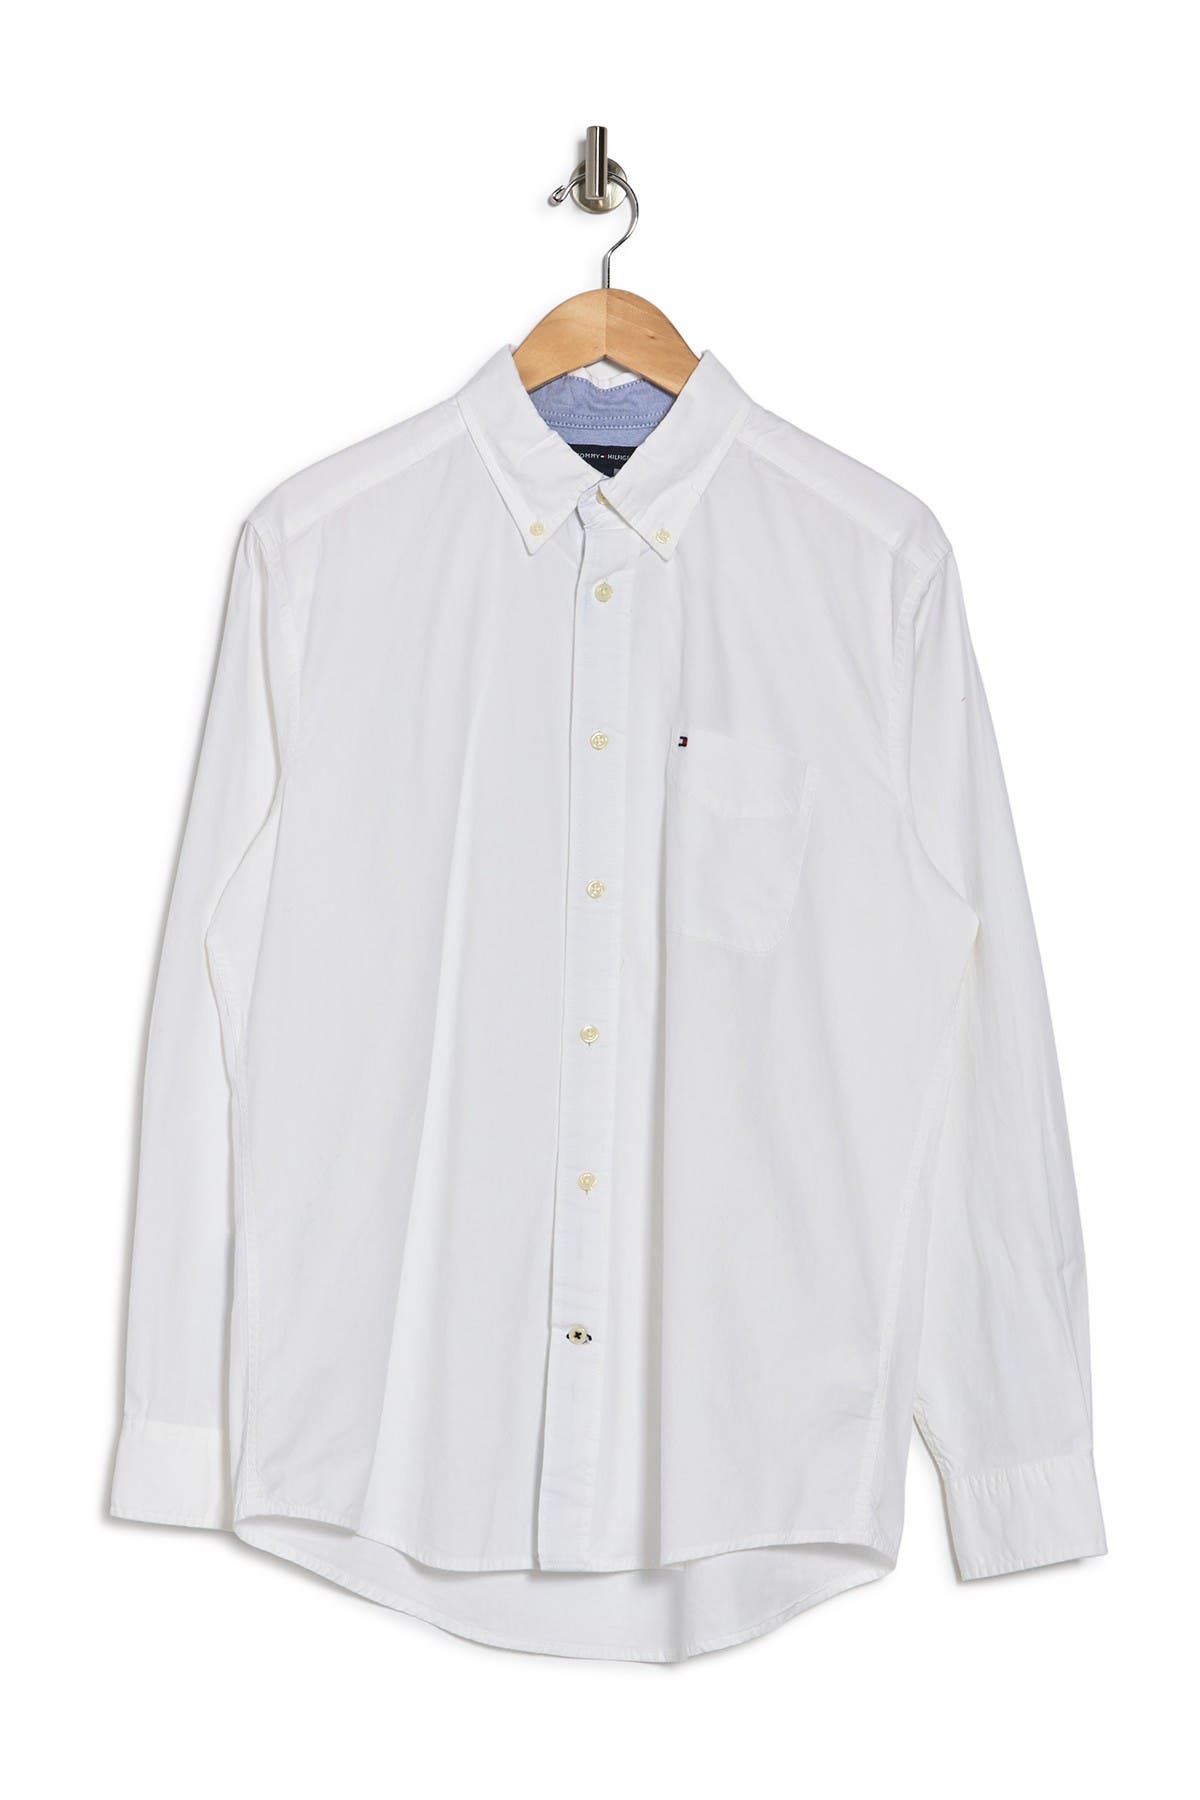 TOMMY HILFIGER BRUSHED LONG SLEEVE BUTTON DOWN SHIRT,646130754668